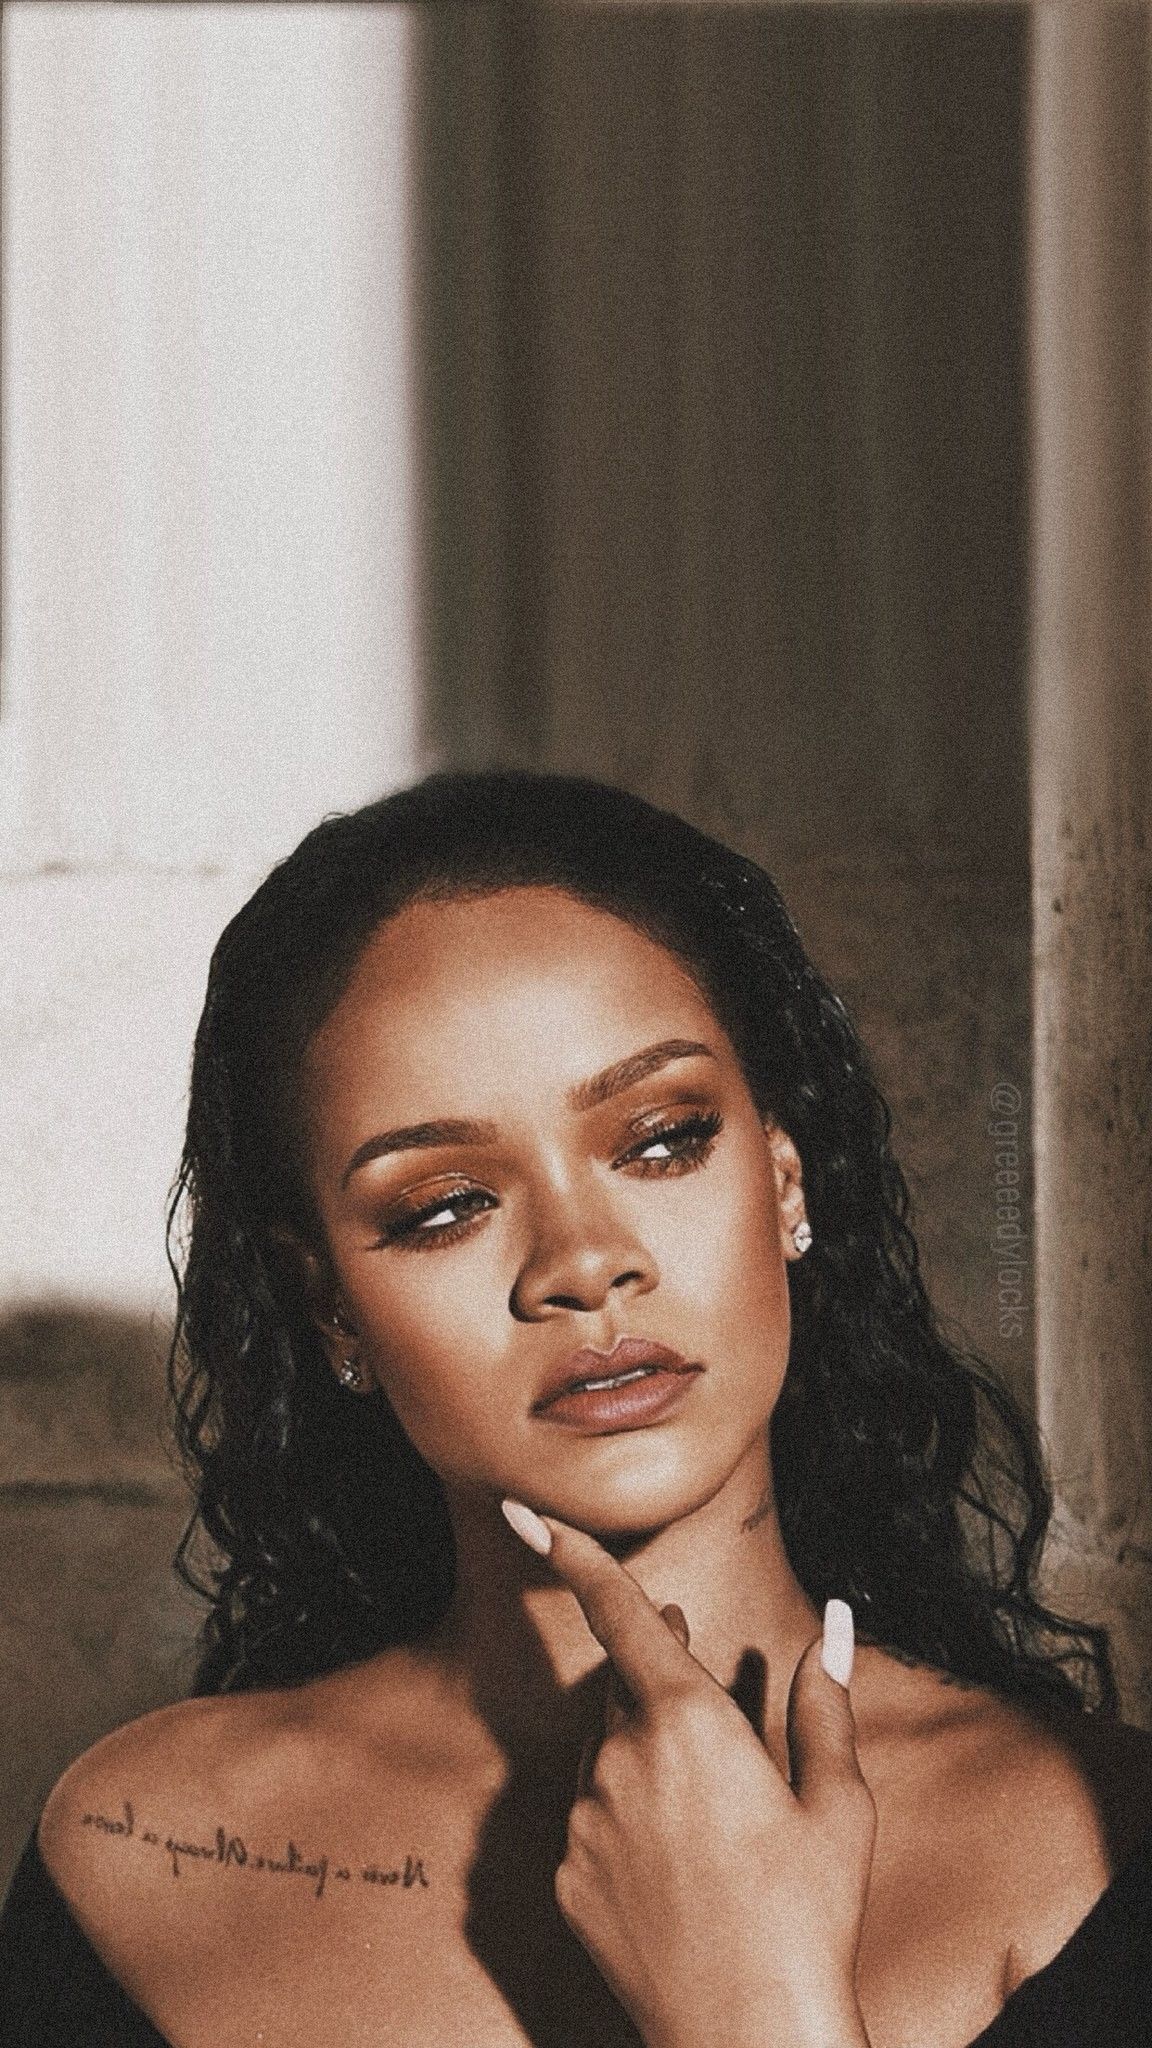 A sepia photo of Rihanna with her hand on her chin - Rihanna